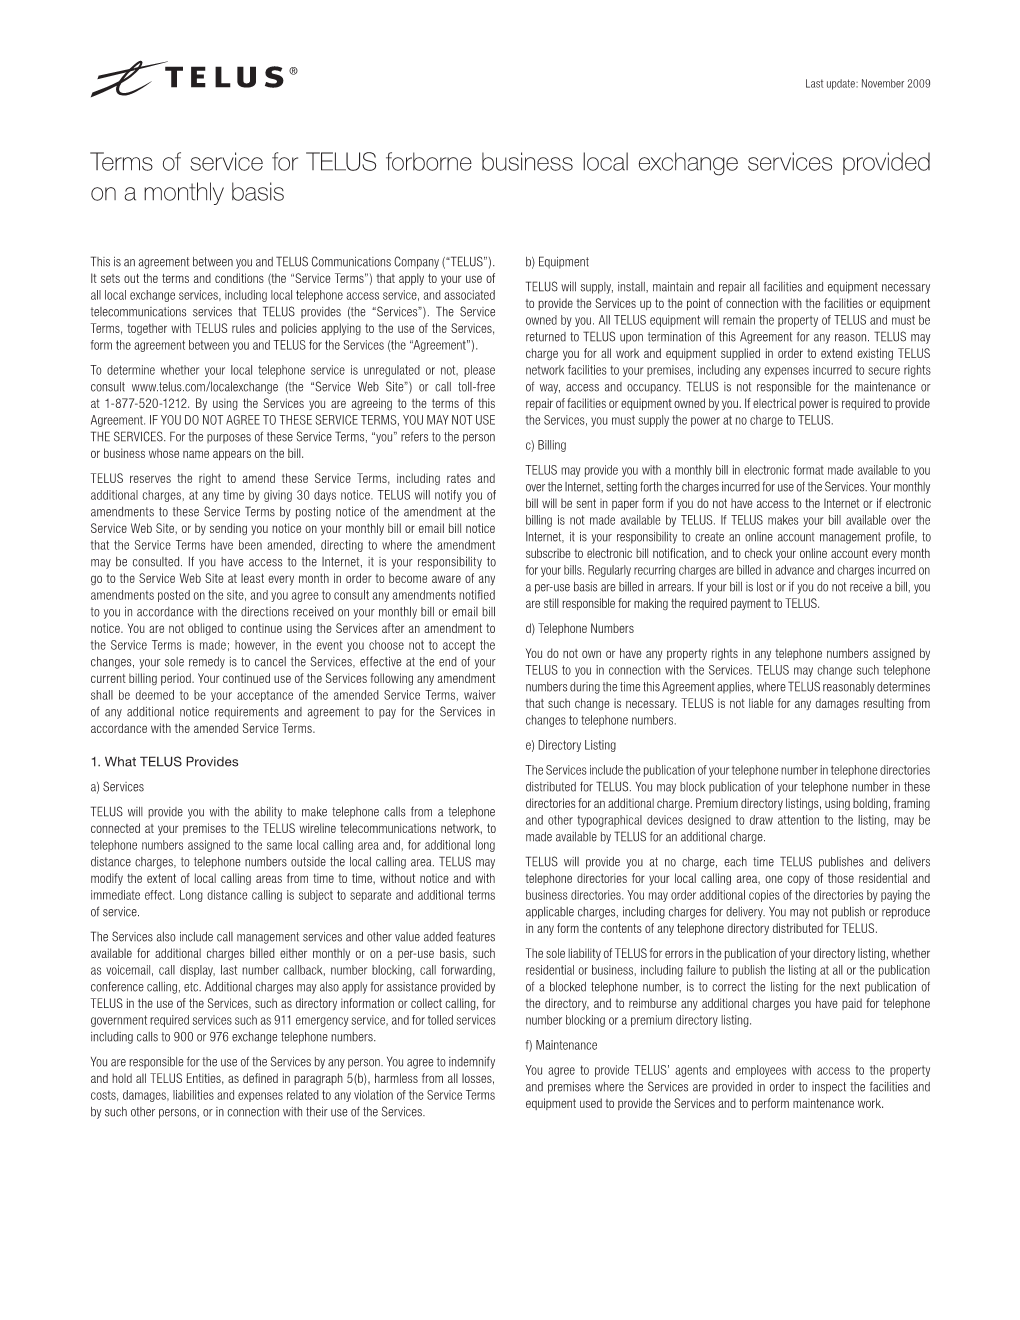 Terms of Service for TELUS Forborne Business Local Exchange Services Provided on a Monthly Basis